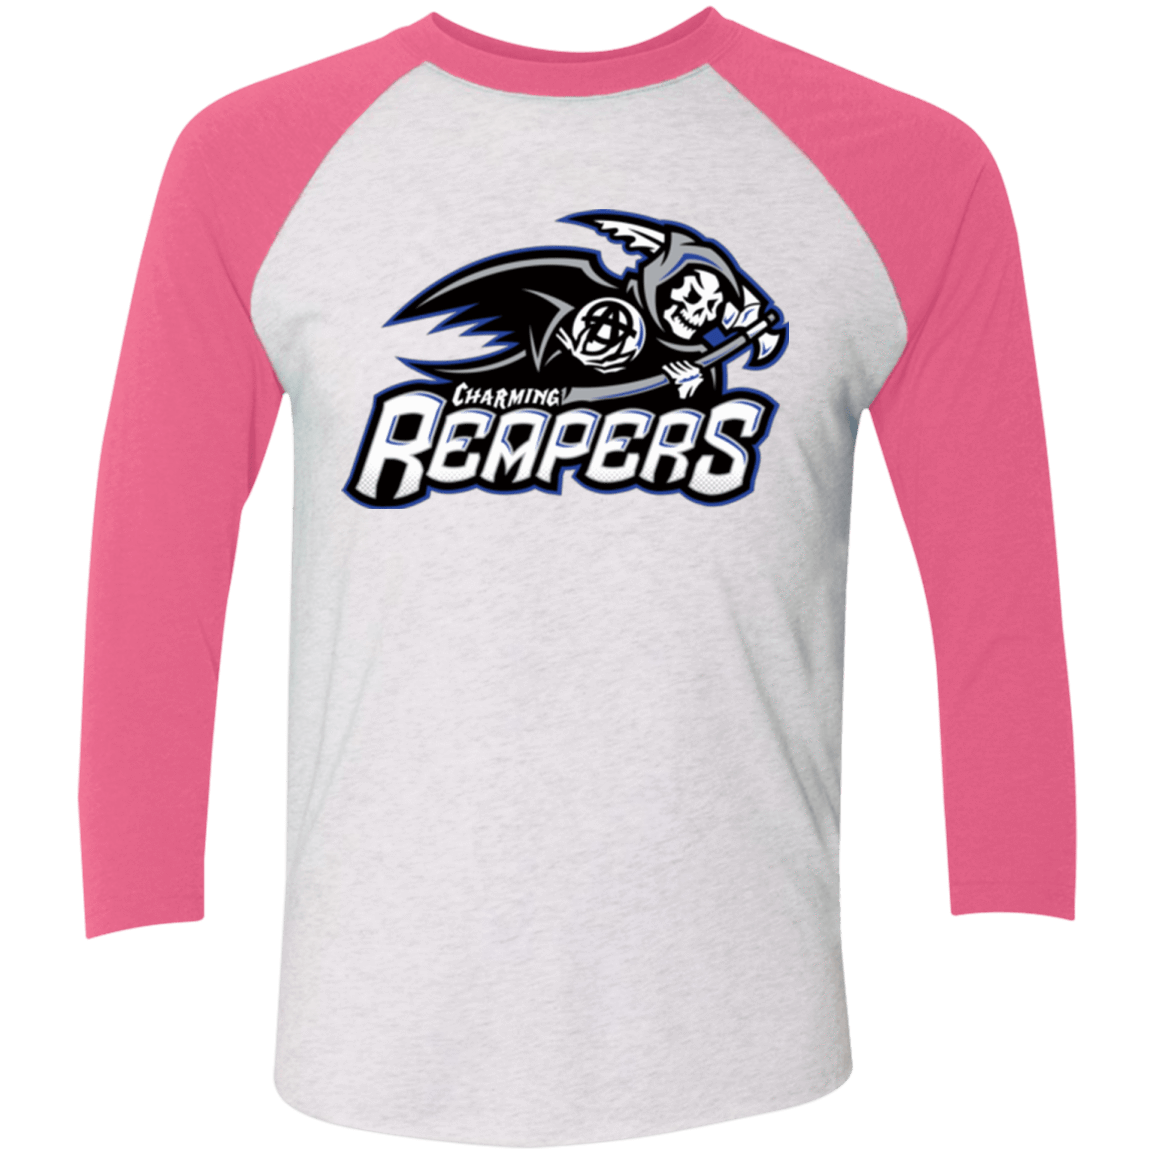 T-Shirts Heather White/Vintage Pink / X-Small Charming Reapers Triblend 3/4 Sleeve